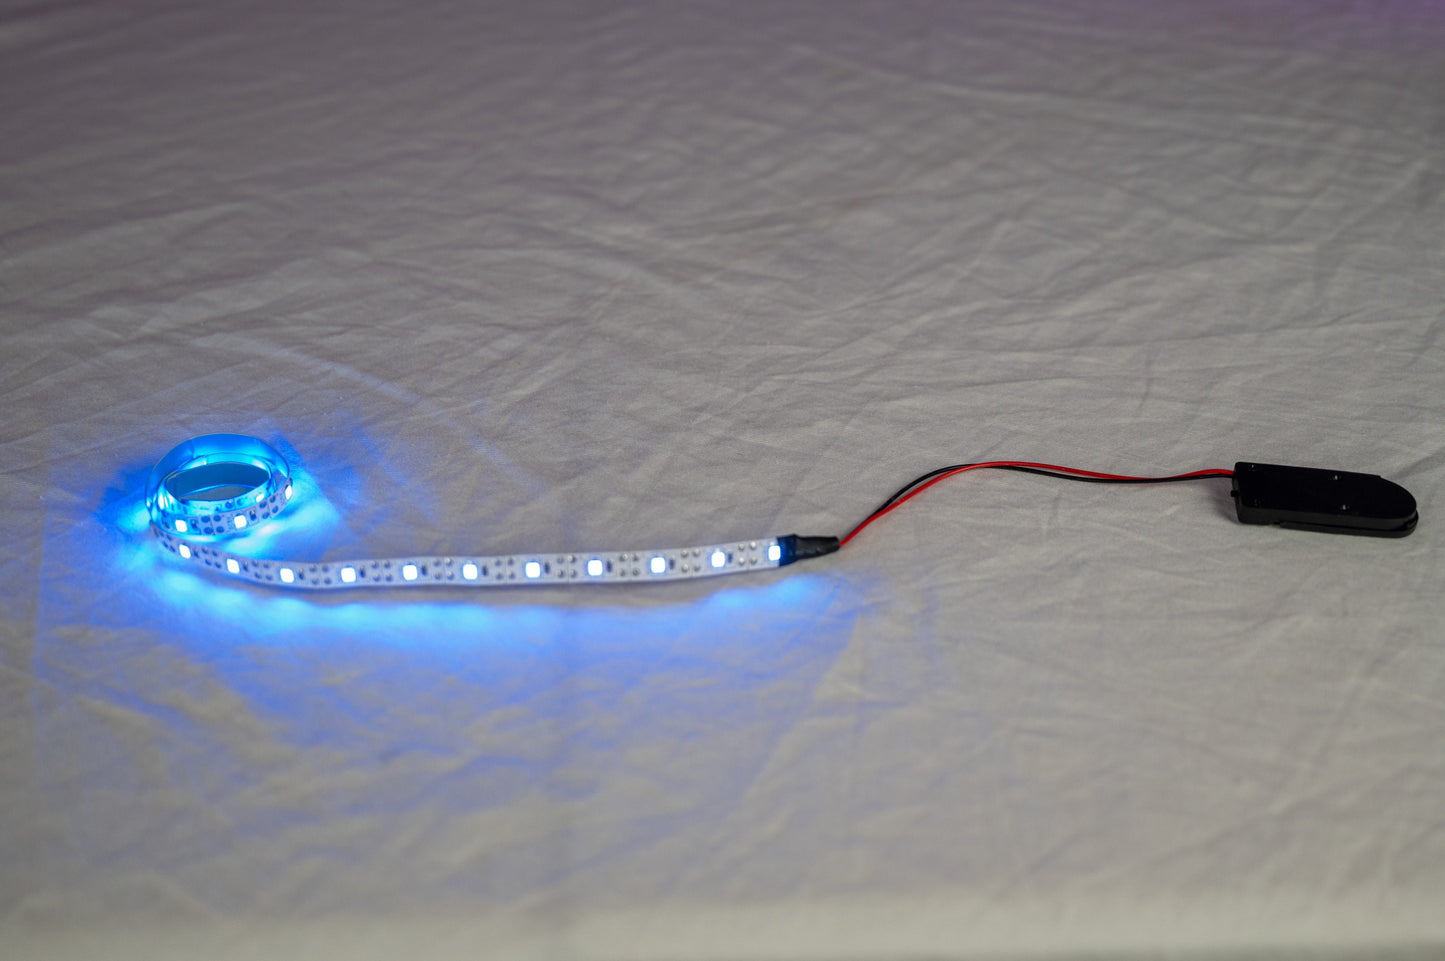 Battery On/Off Switch Powered LED Light Strips For Cosplay and Anime Armor Weapons and Props